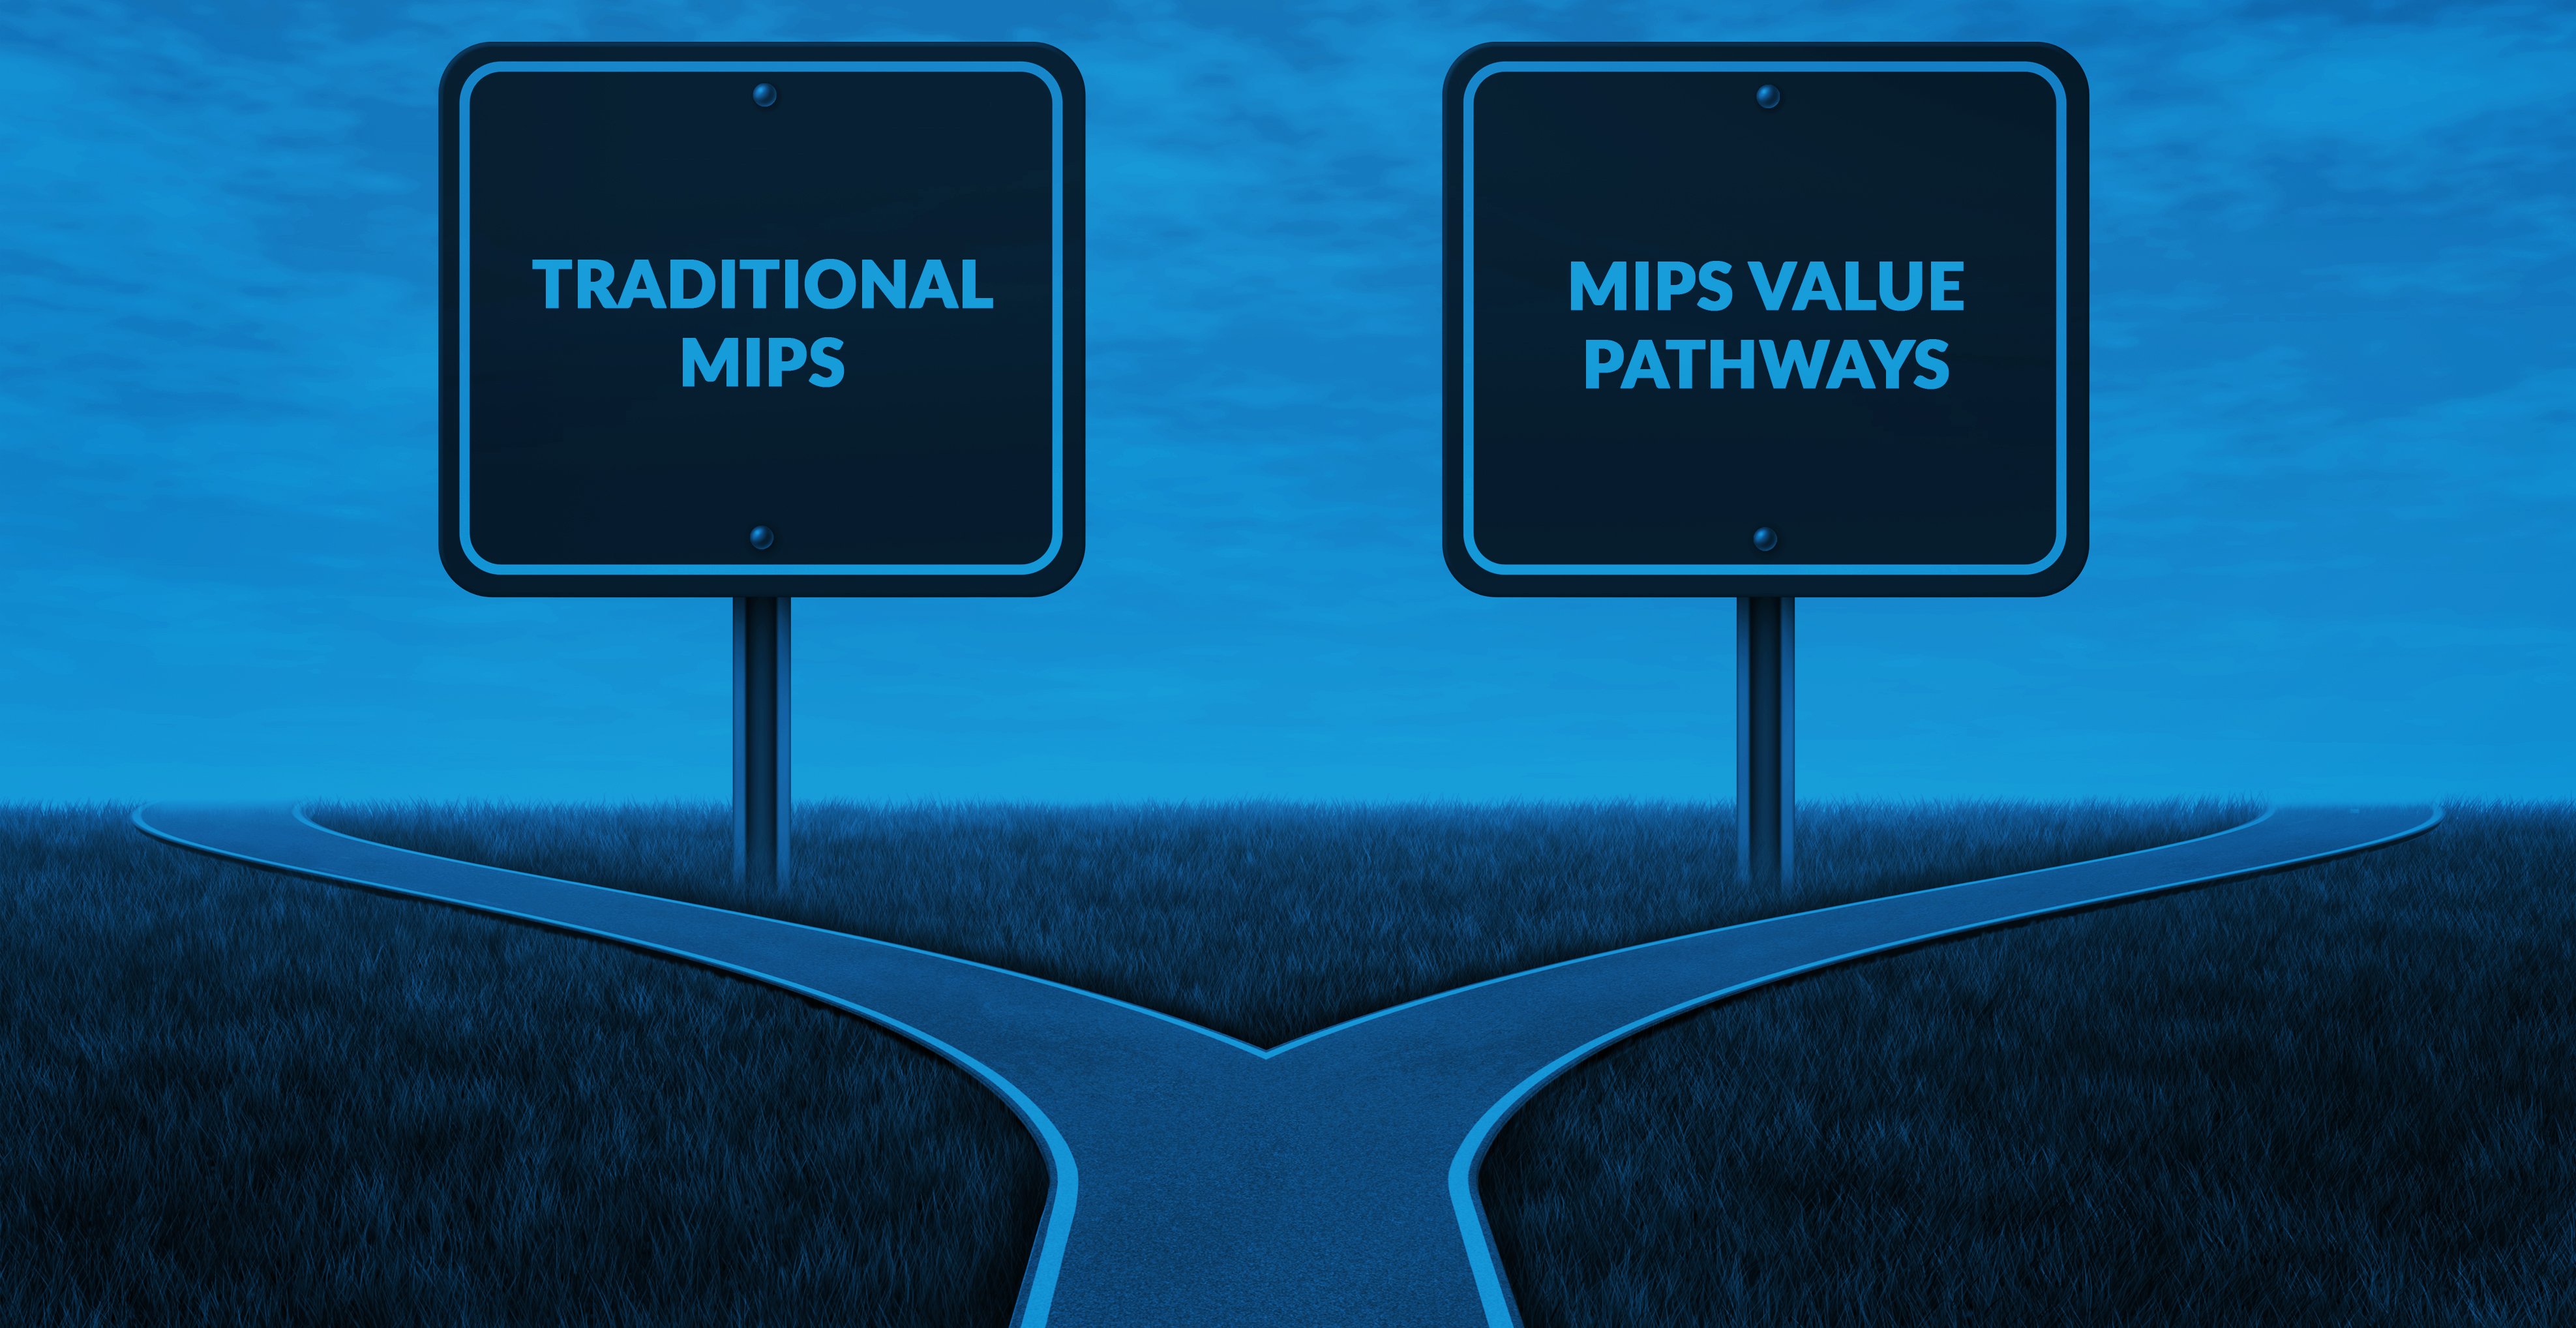 Traditional MIPS and MIPS Value Pathways